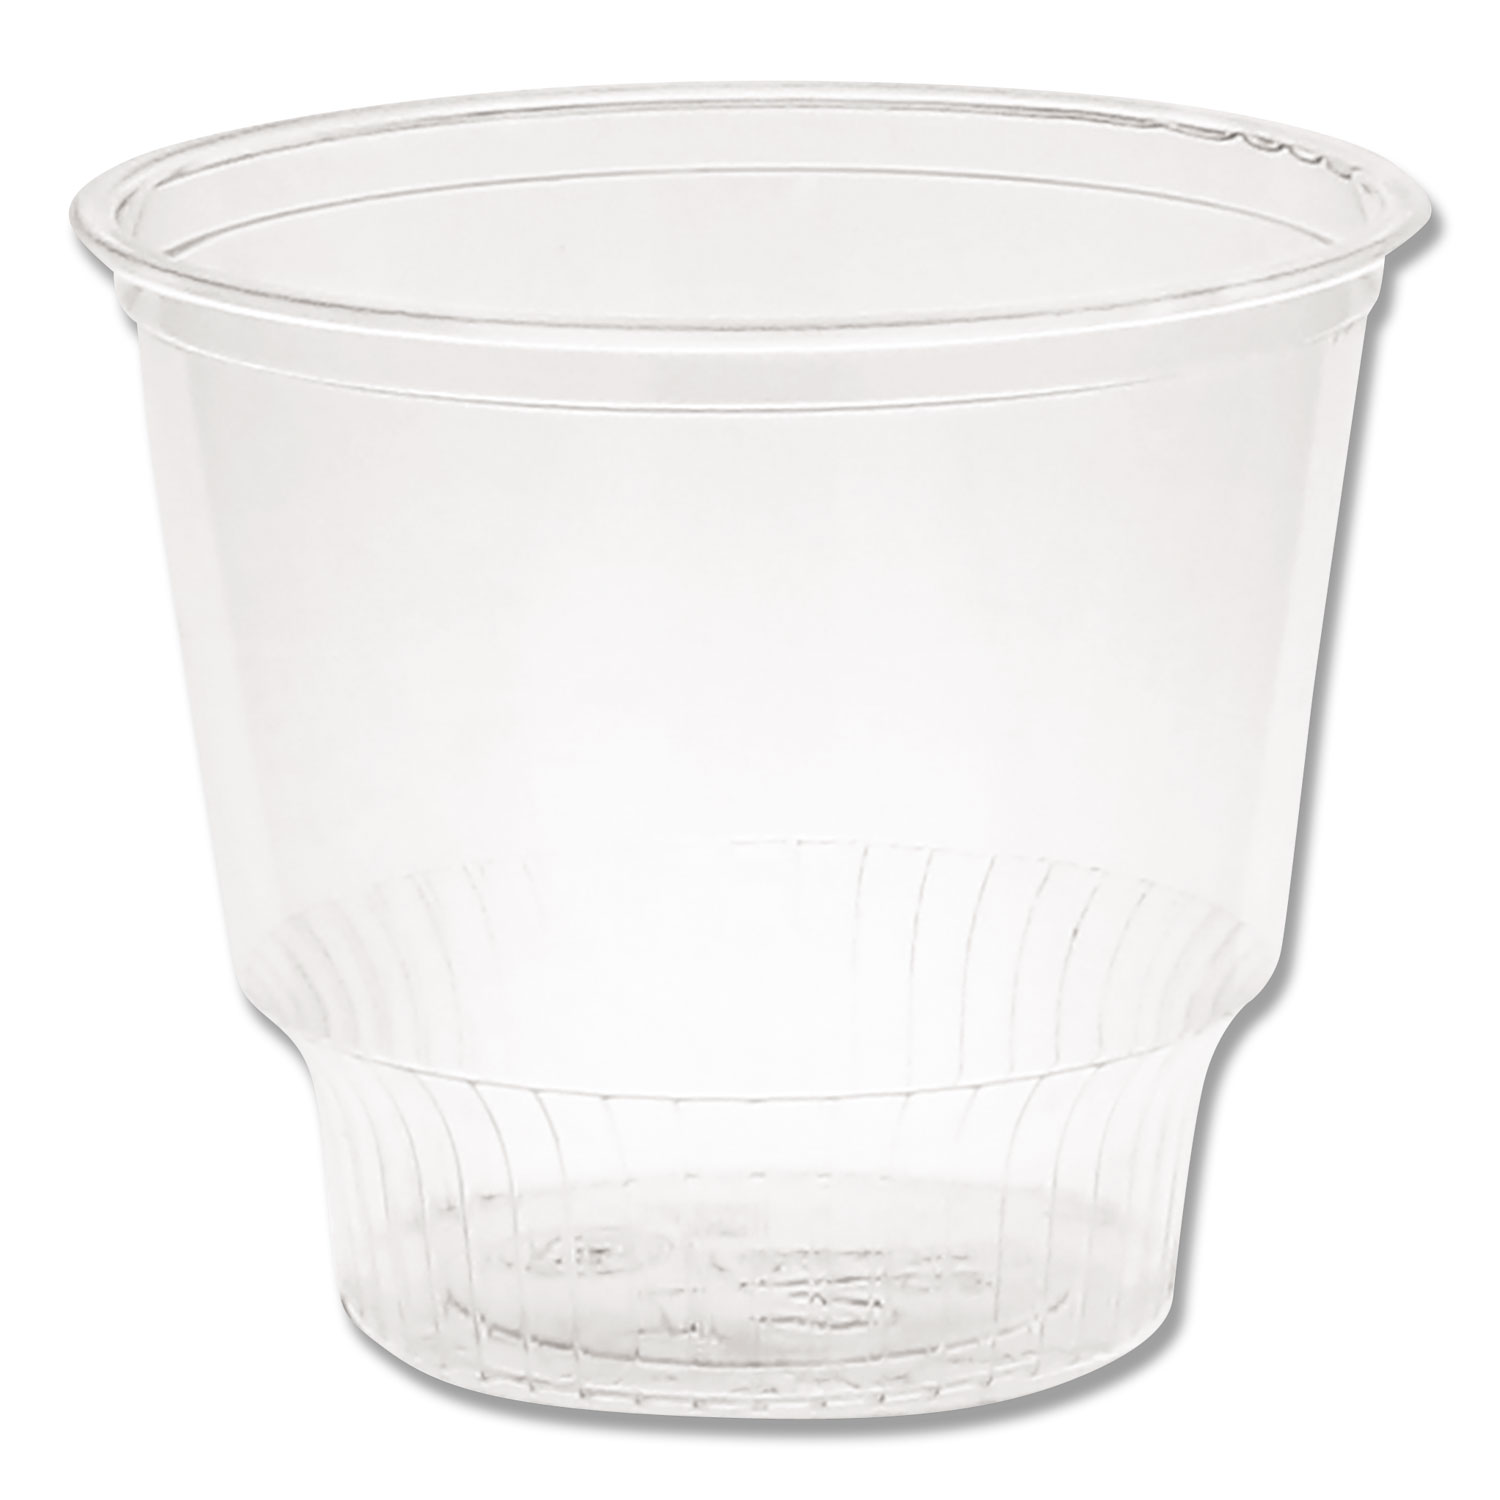  Pactiv YPS12C Clear Sundae Dishes, 12 oz, 50 Dishes/Bag, 20 Bag/Carton (PCTYPS12C) 